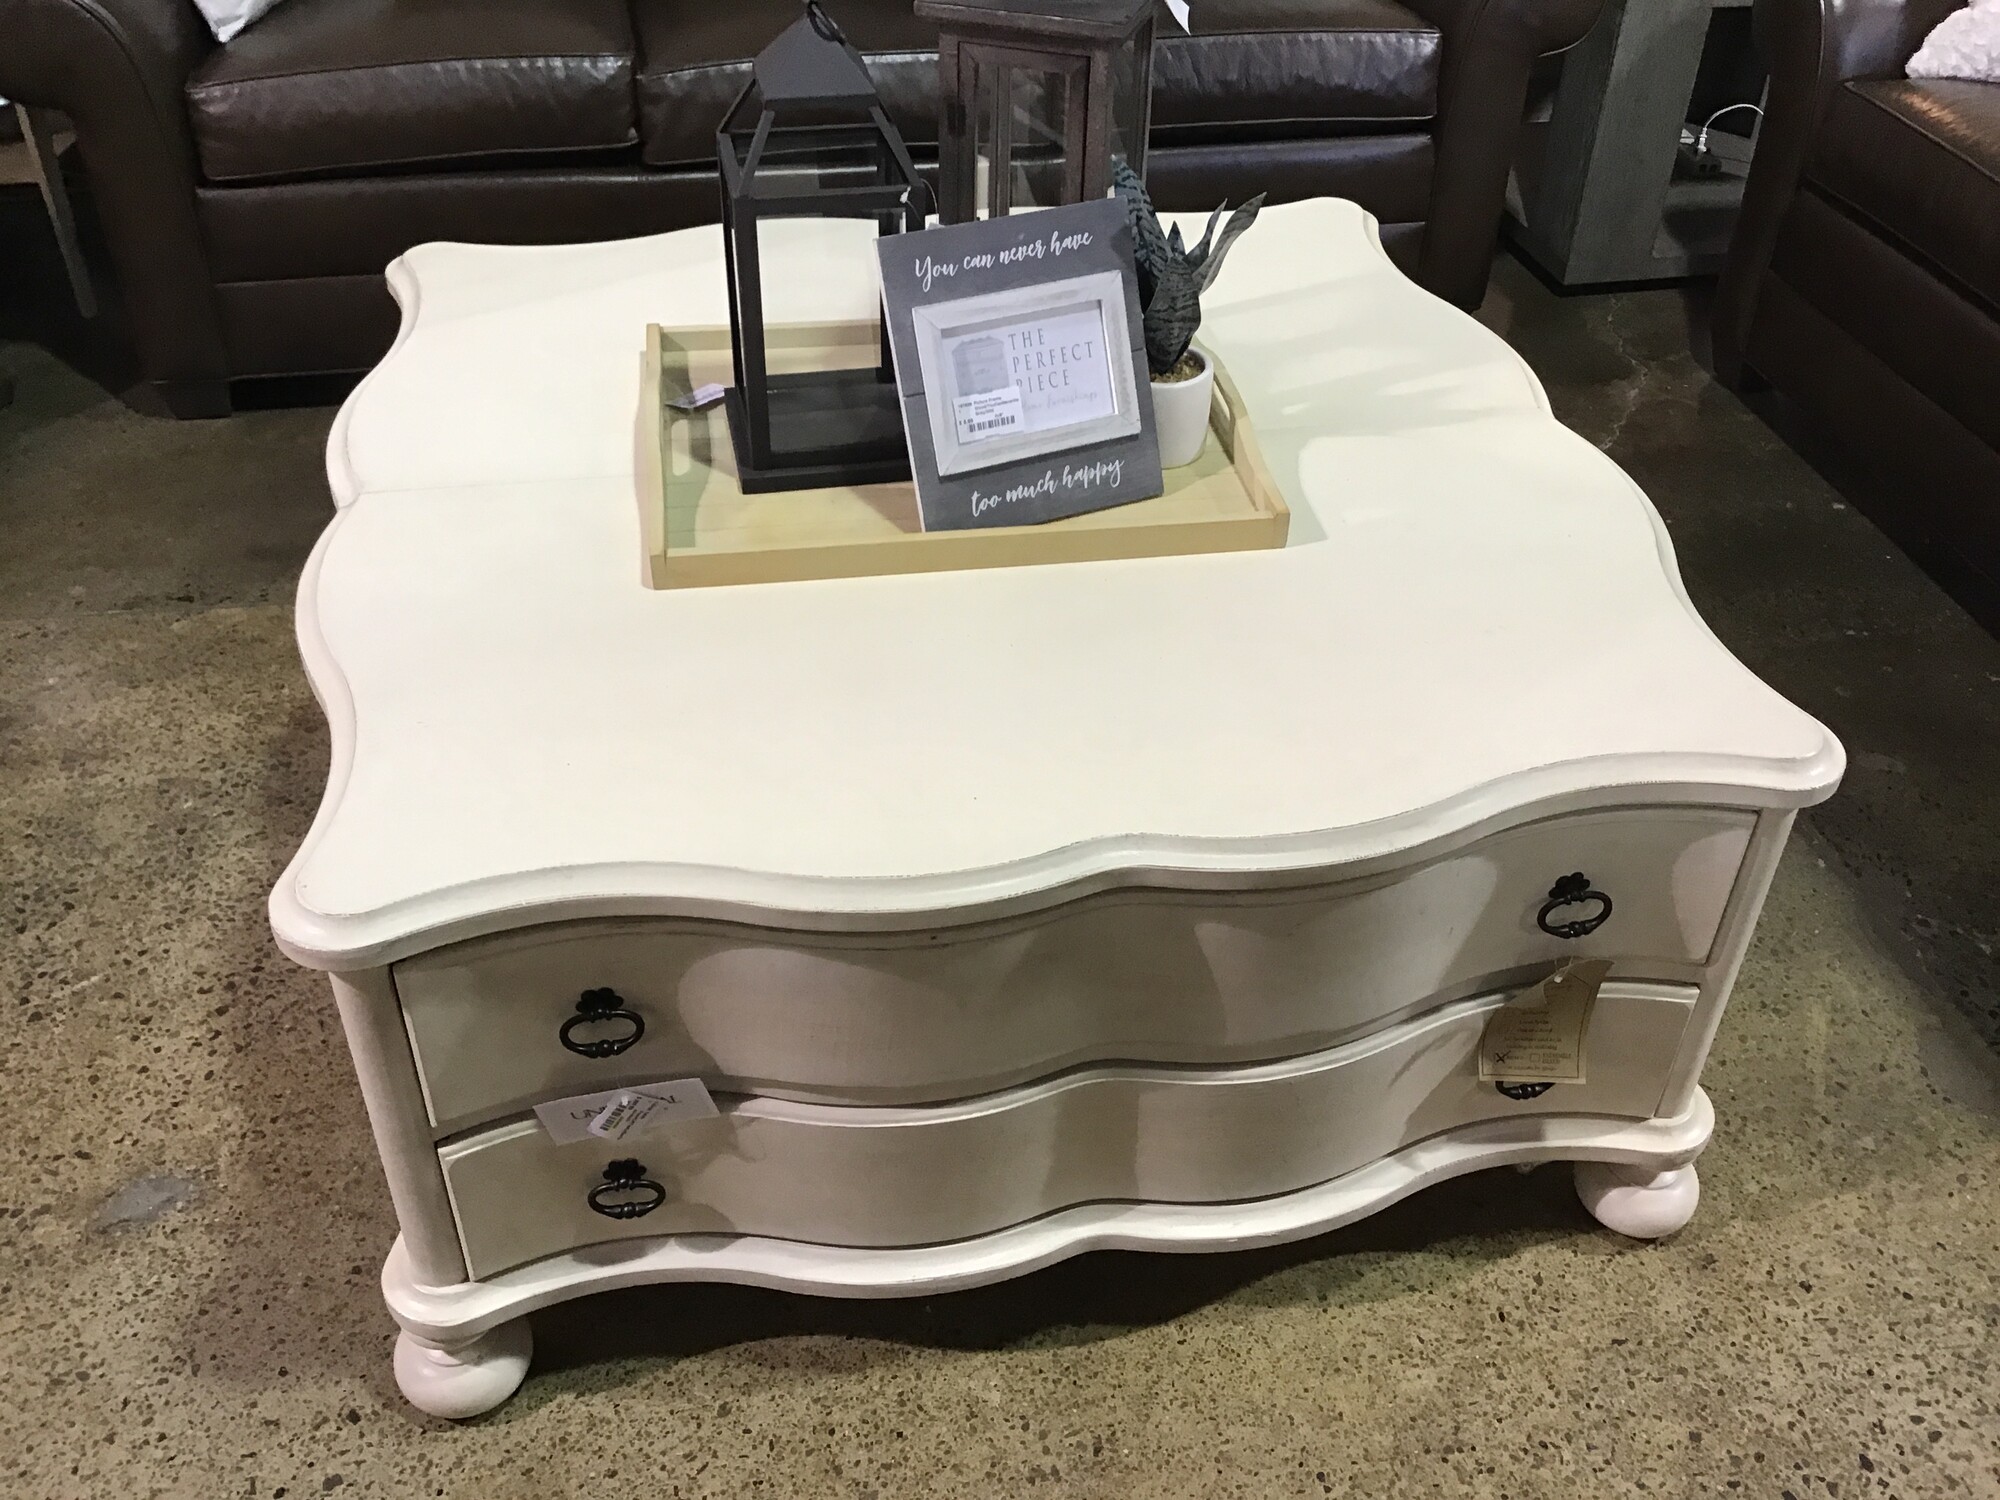 Universal Furniture
Cream
Square coffee table
2 large drawers
Convenient lift top mechanism
Bun feet
Ring drawer pulls

Dimensions:  44x44x21